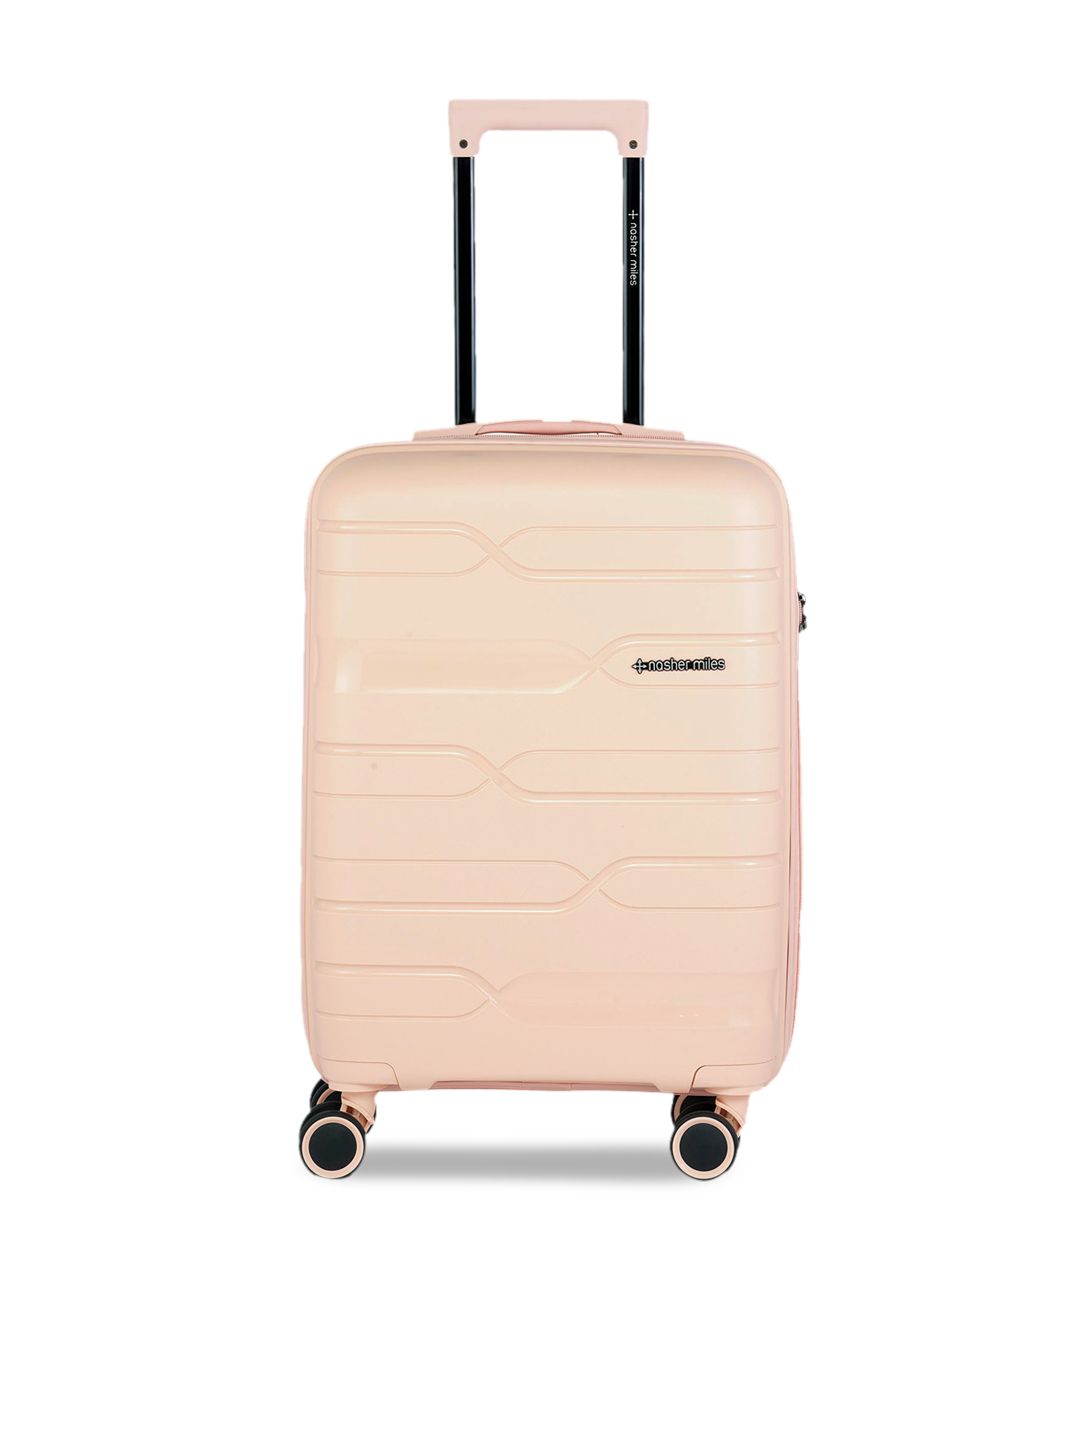 Nasher Miles Peach-Toned & Black Solid Hard-Sided Cabin Trolley Bag Price in India